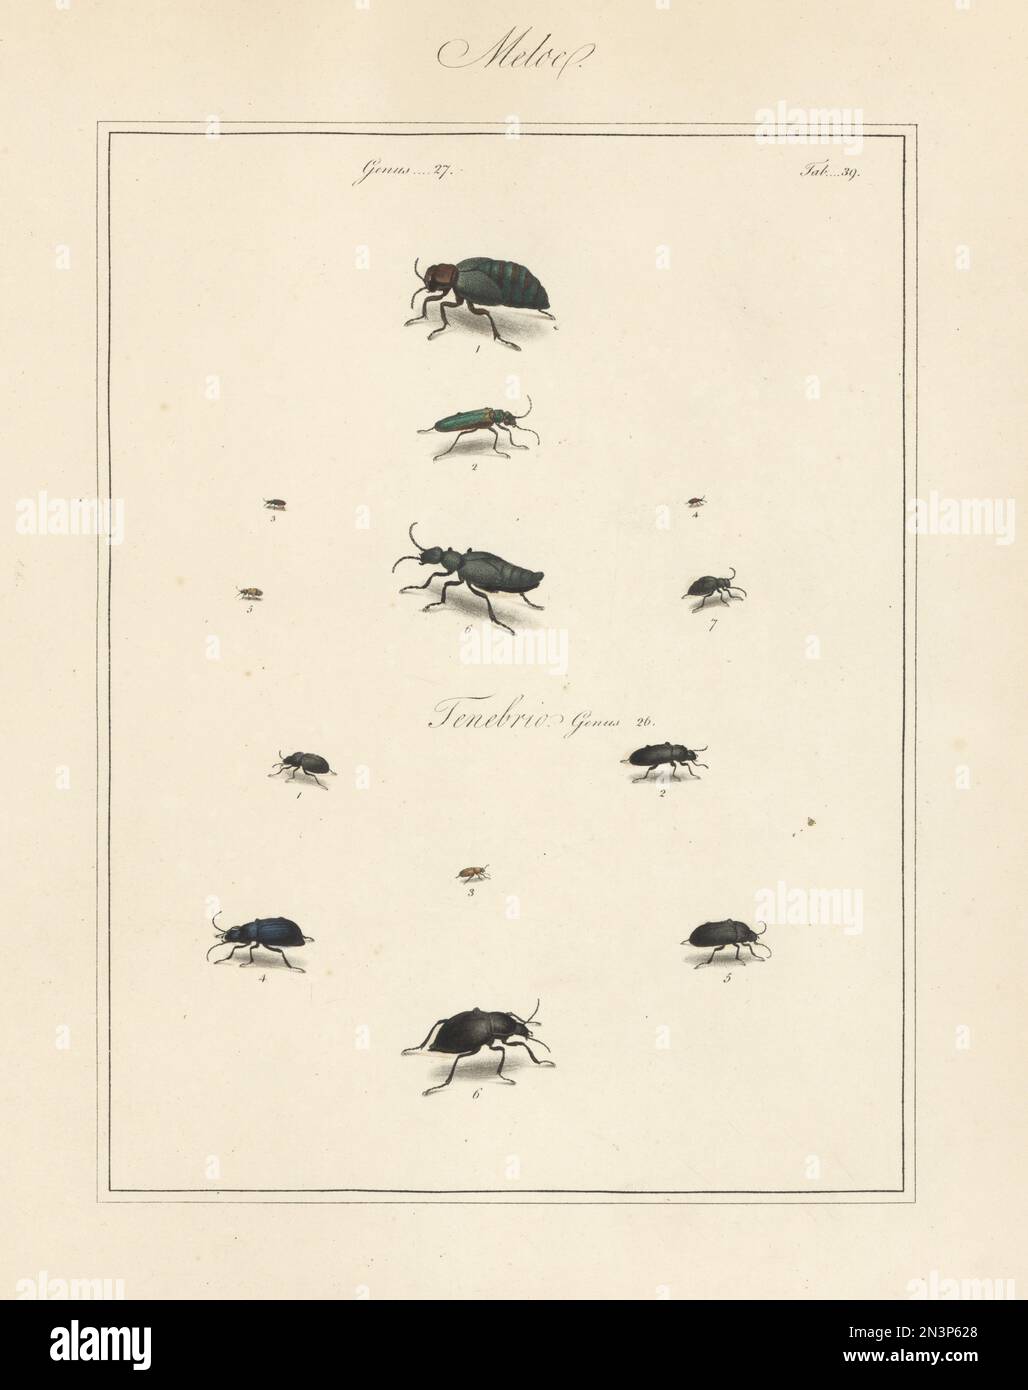 Lytta spanishfly, Lytta vesicatoria 2, Anthicus antherinus 3, narrownecked grain beetle, Omonadus floralis 4, Notoxus monoceros 5, black oil-beetle, Notoxus monoceros 6, var. or male? 7, unknown Meloe species 1. Handcoloured copperplate engraving from Thomas Martyn’s The English Entomologist, Exhibiting all the Coleopterous Insects found in England, Academy for Illustrating and Painting Natural History, London, 1792. Stock Photo